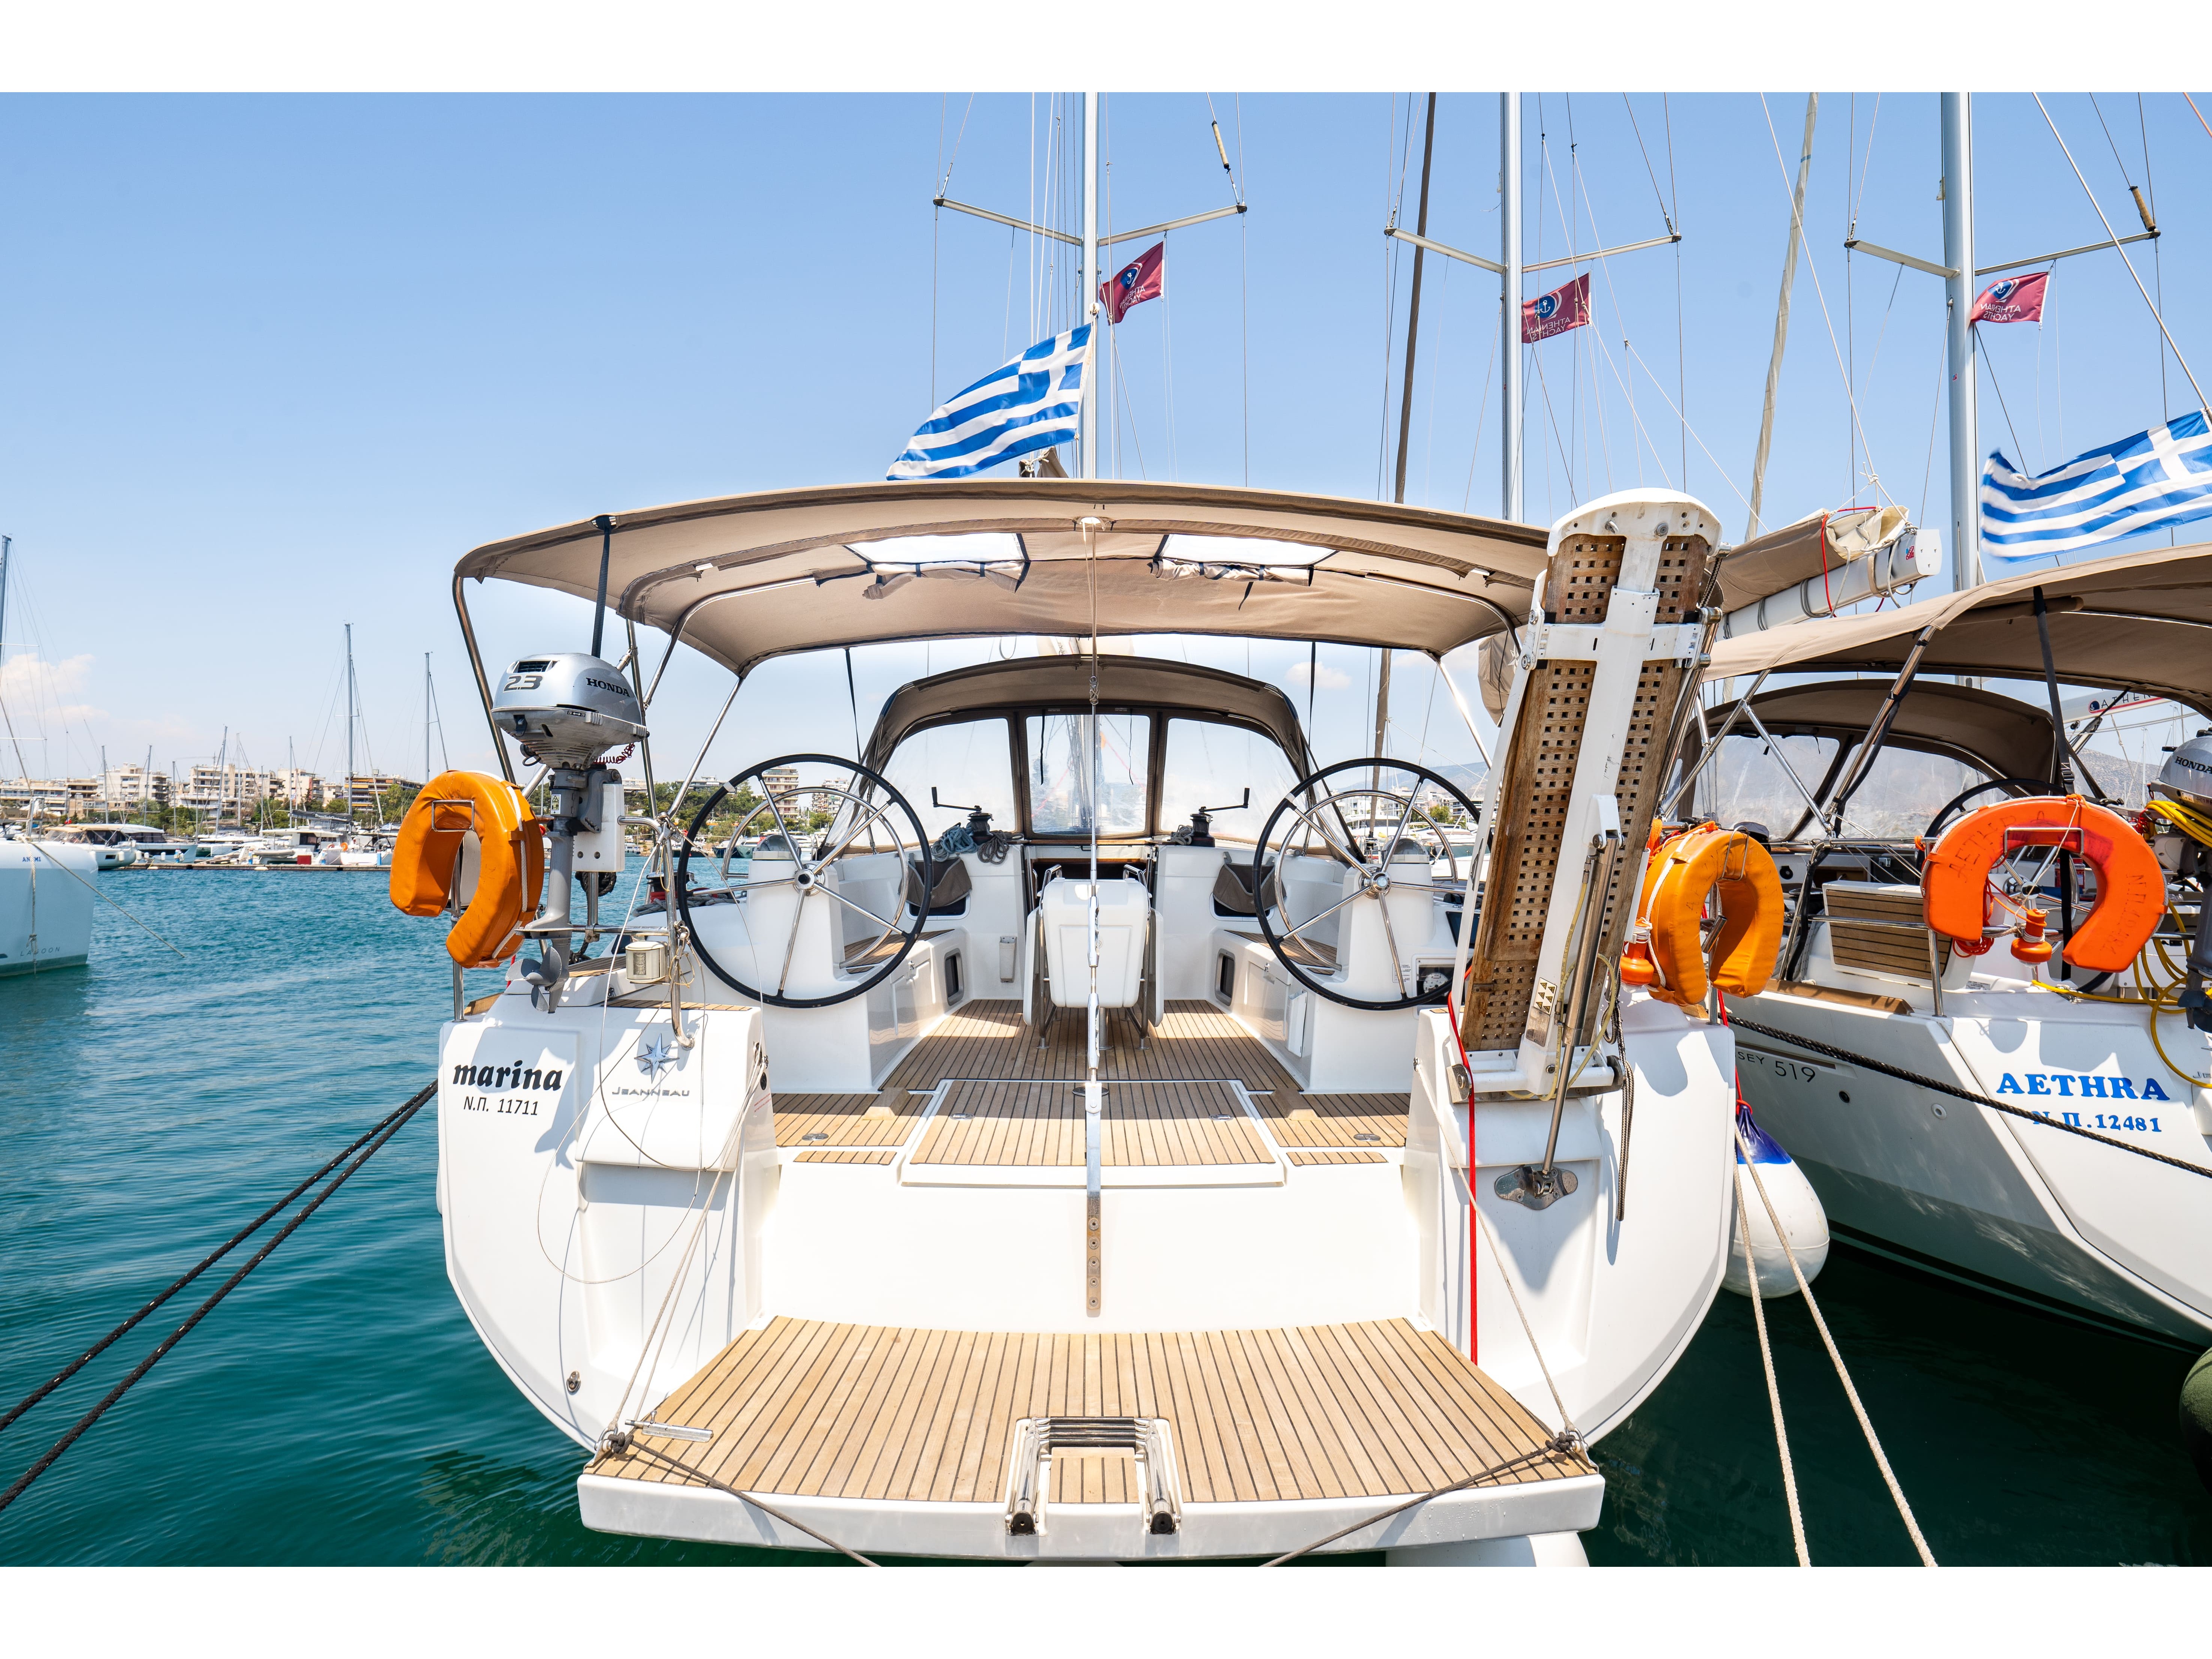 Sun Odyssey 519 - Alimos Yacht Charter & Boat hire in Greece Athens and Saronic Gulf Athens Alimos Alimos Marina 4